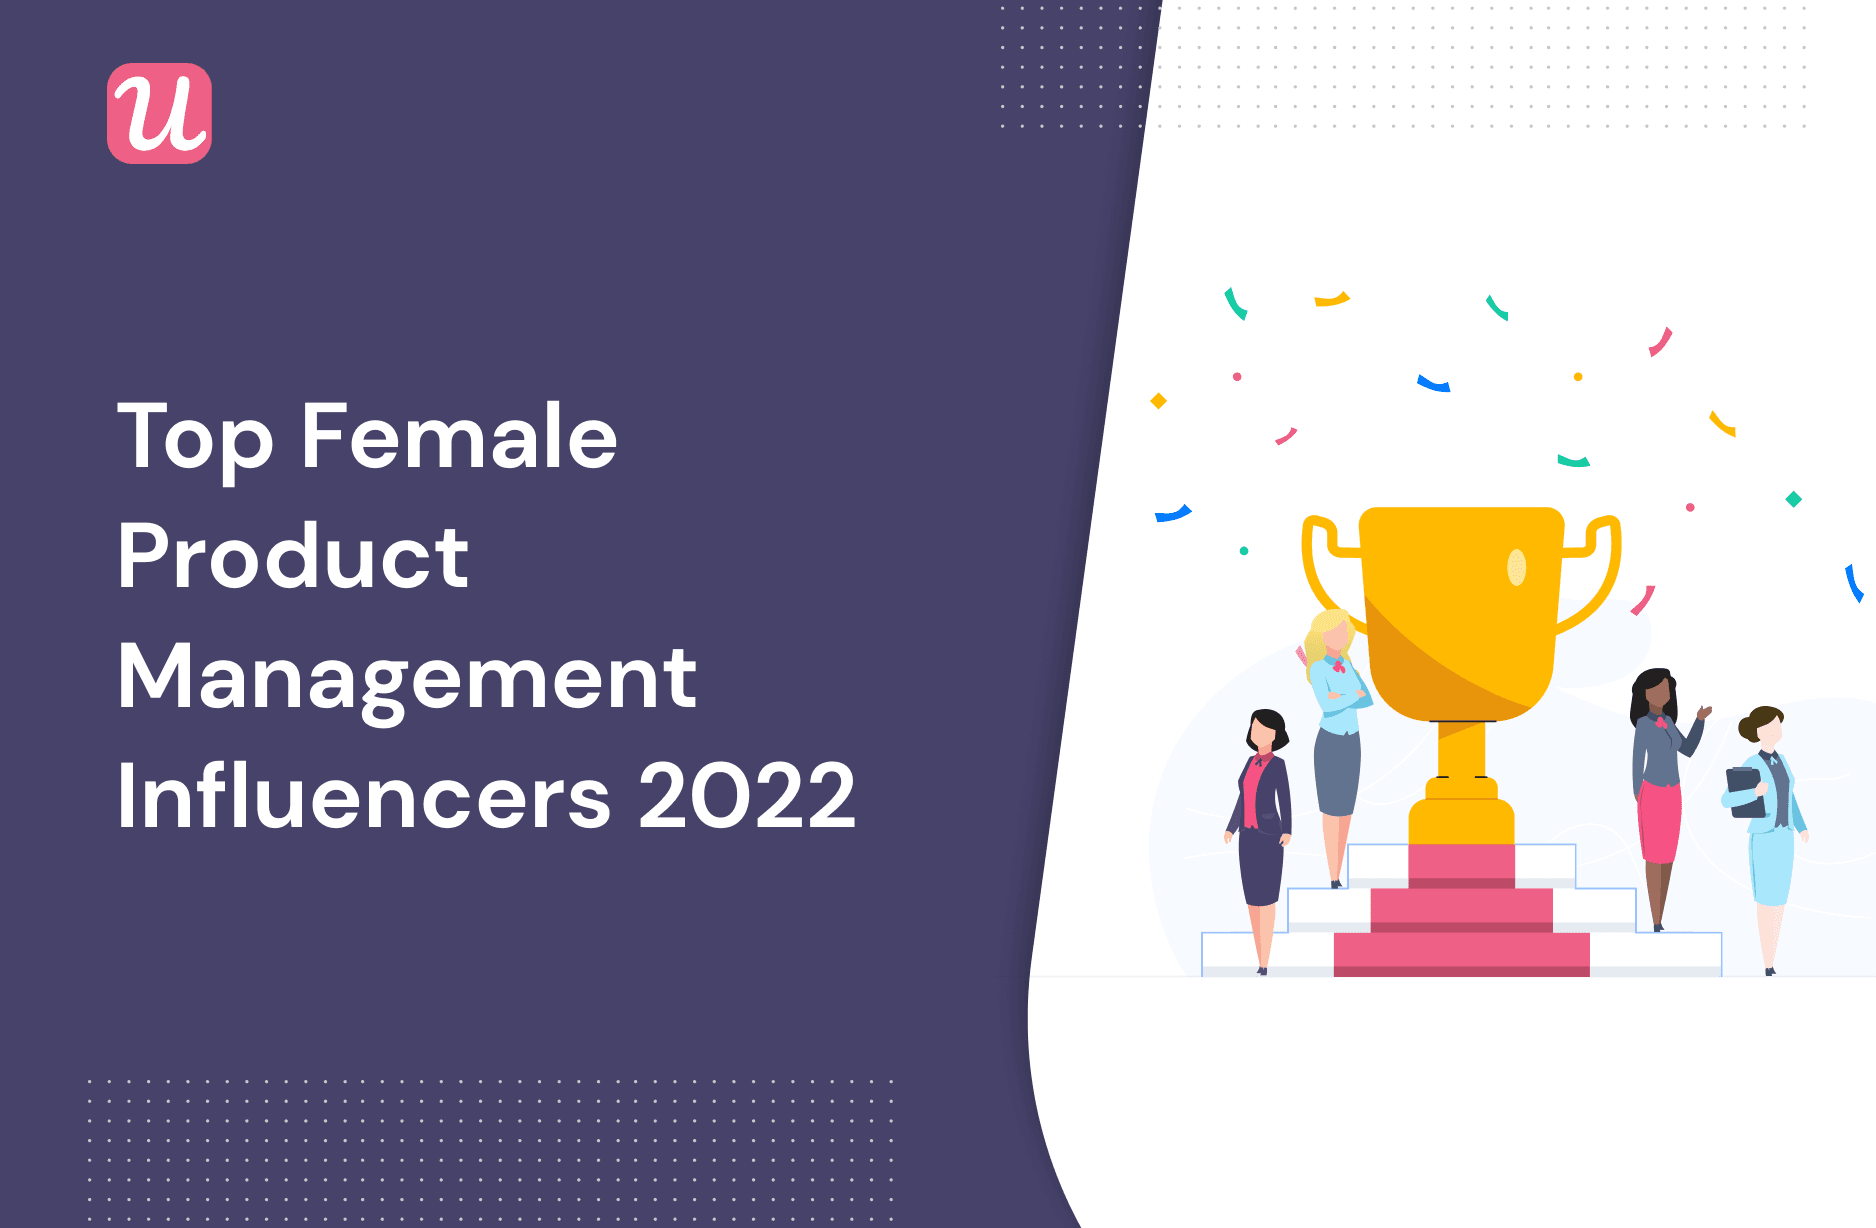 Top 11 Female Product Management Influencers to watch in 2022